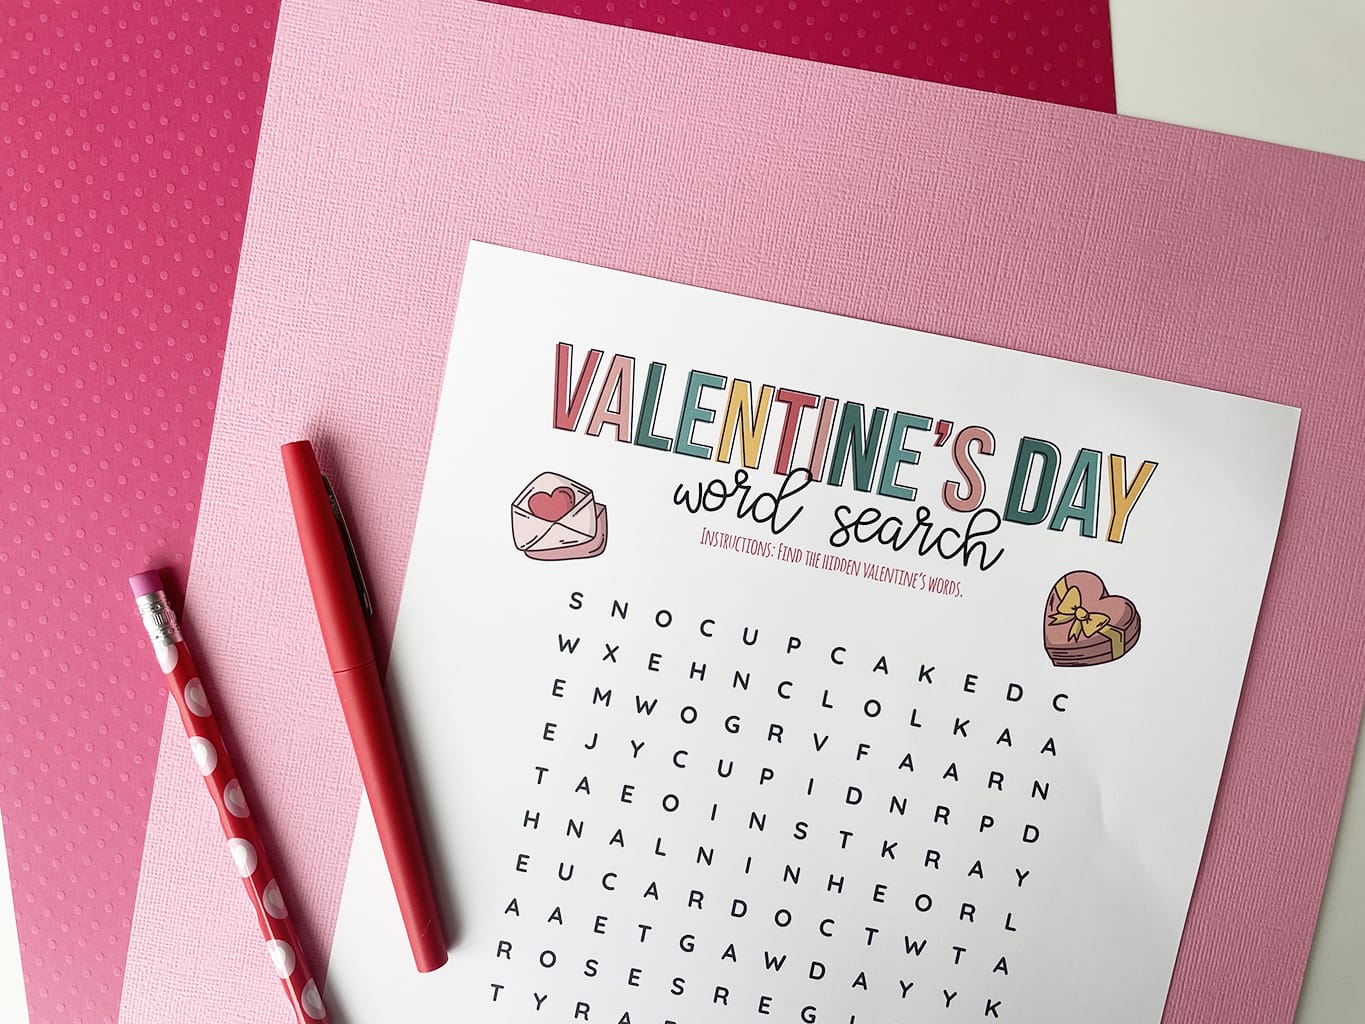 Valentine's Day Word Search Printable, printed out and placed on a light pink paper and a dark pink paper background. Valentine pencil and red fine line marker on the side.